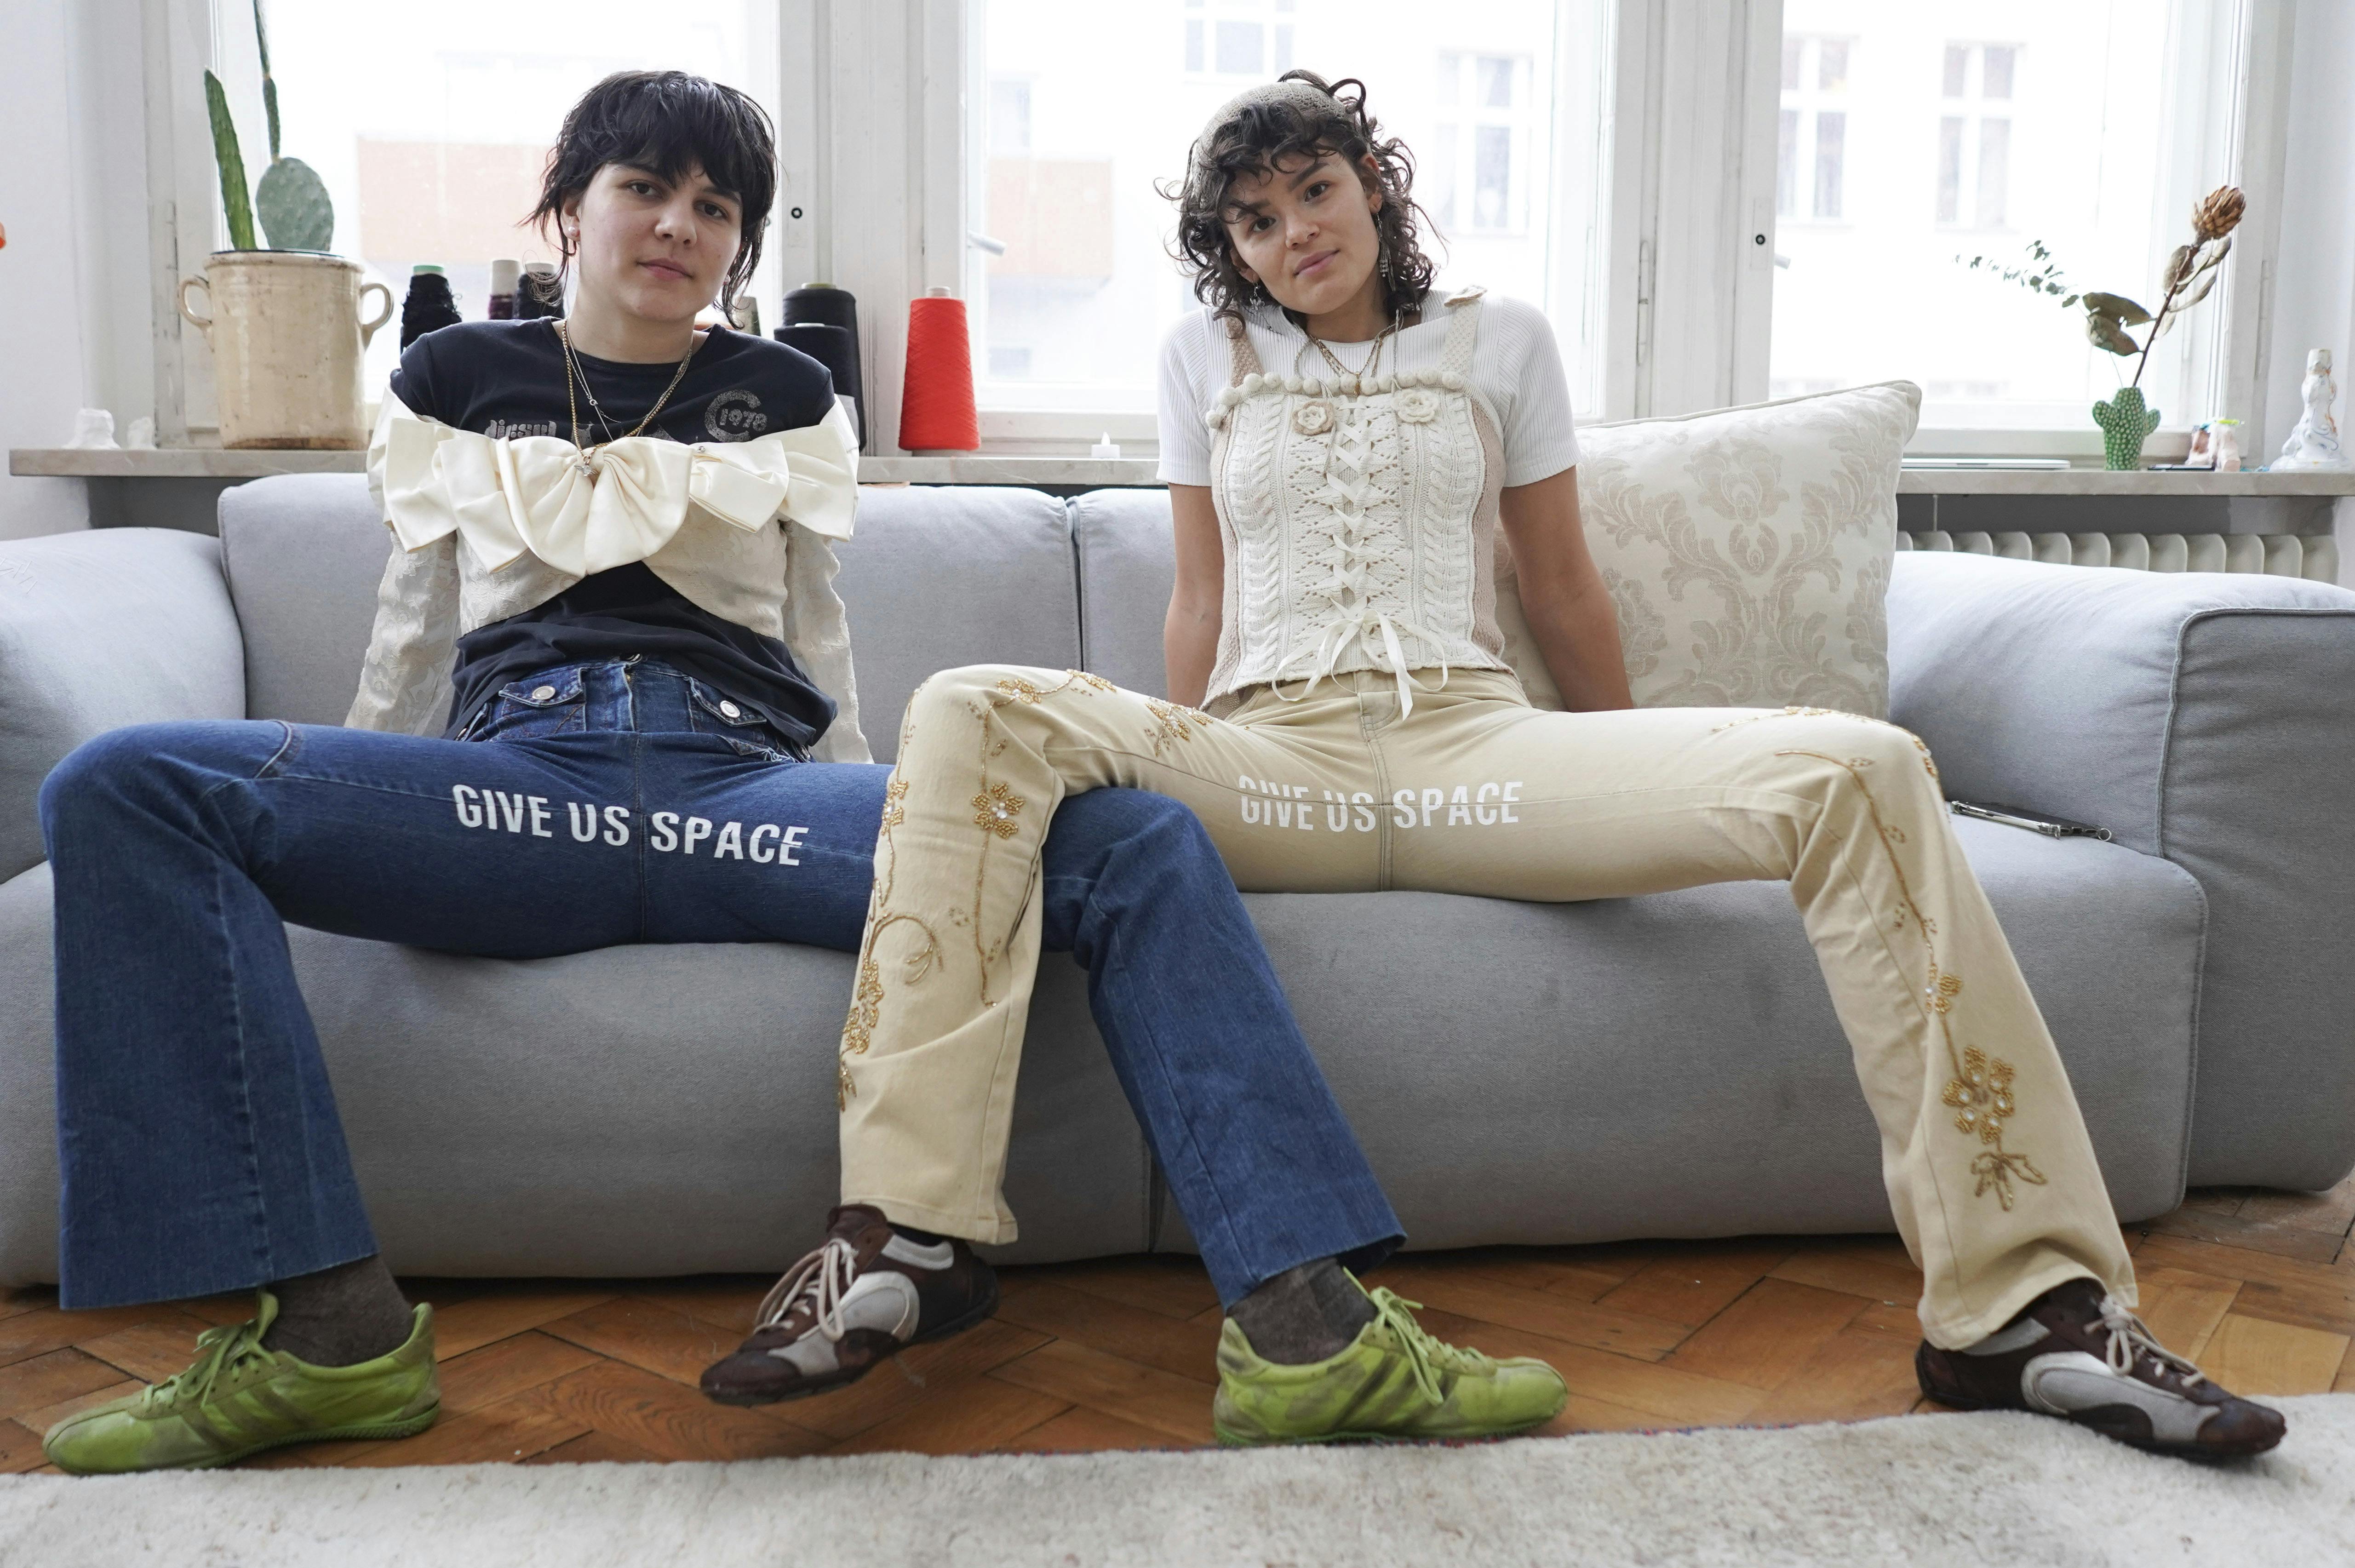 22 January 2021, Berlin: Designers Mina Bonakdar (l) and Elena Buscaino take on "manspreading" with slogans on the crotch of their pants and sit on a sofa. The "Riot Pant Project" makes a statement against spacey macho gestures on public transport. (to dpa-KORR.: "When men manspread - Berlin women make a statement") Photo by: J'rg Carstensen/picture-alliance/dpa/AP Images